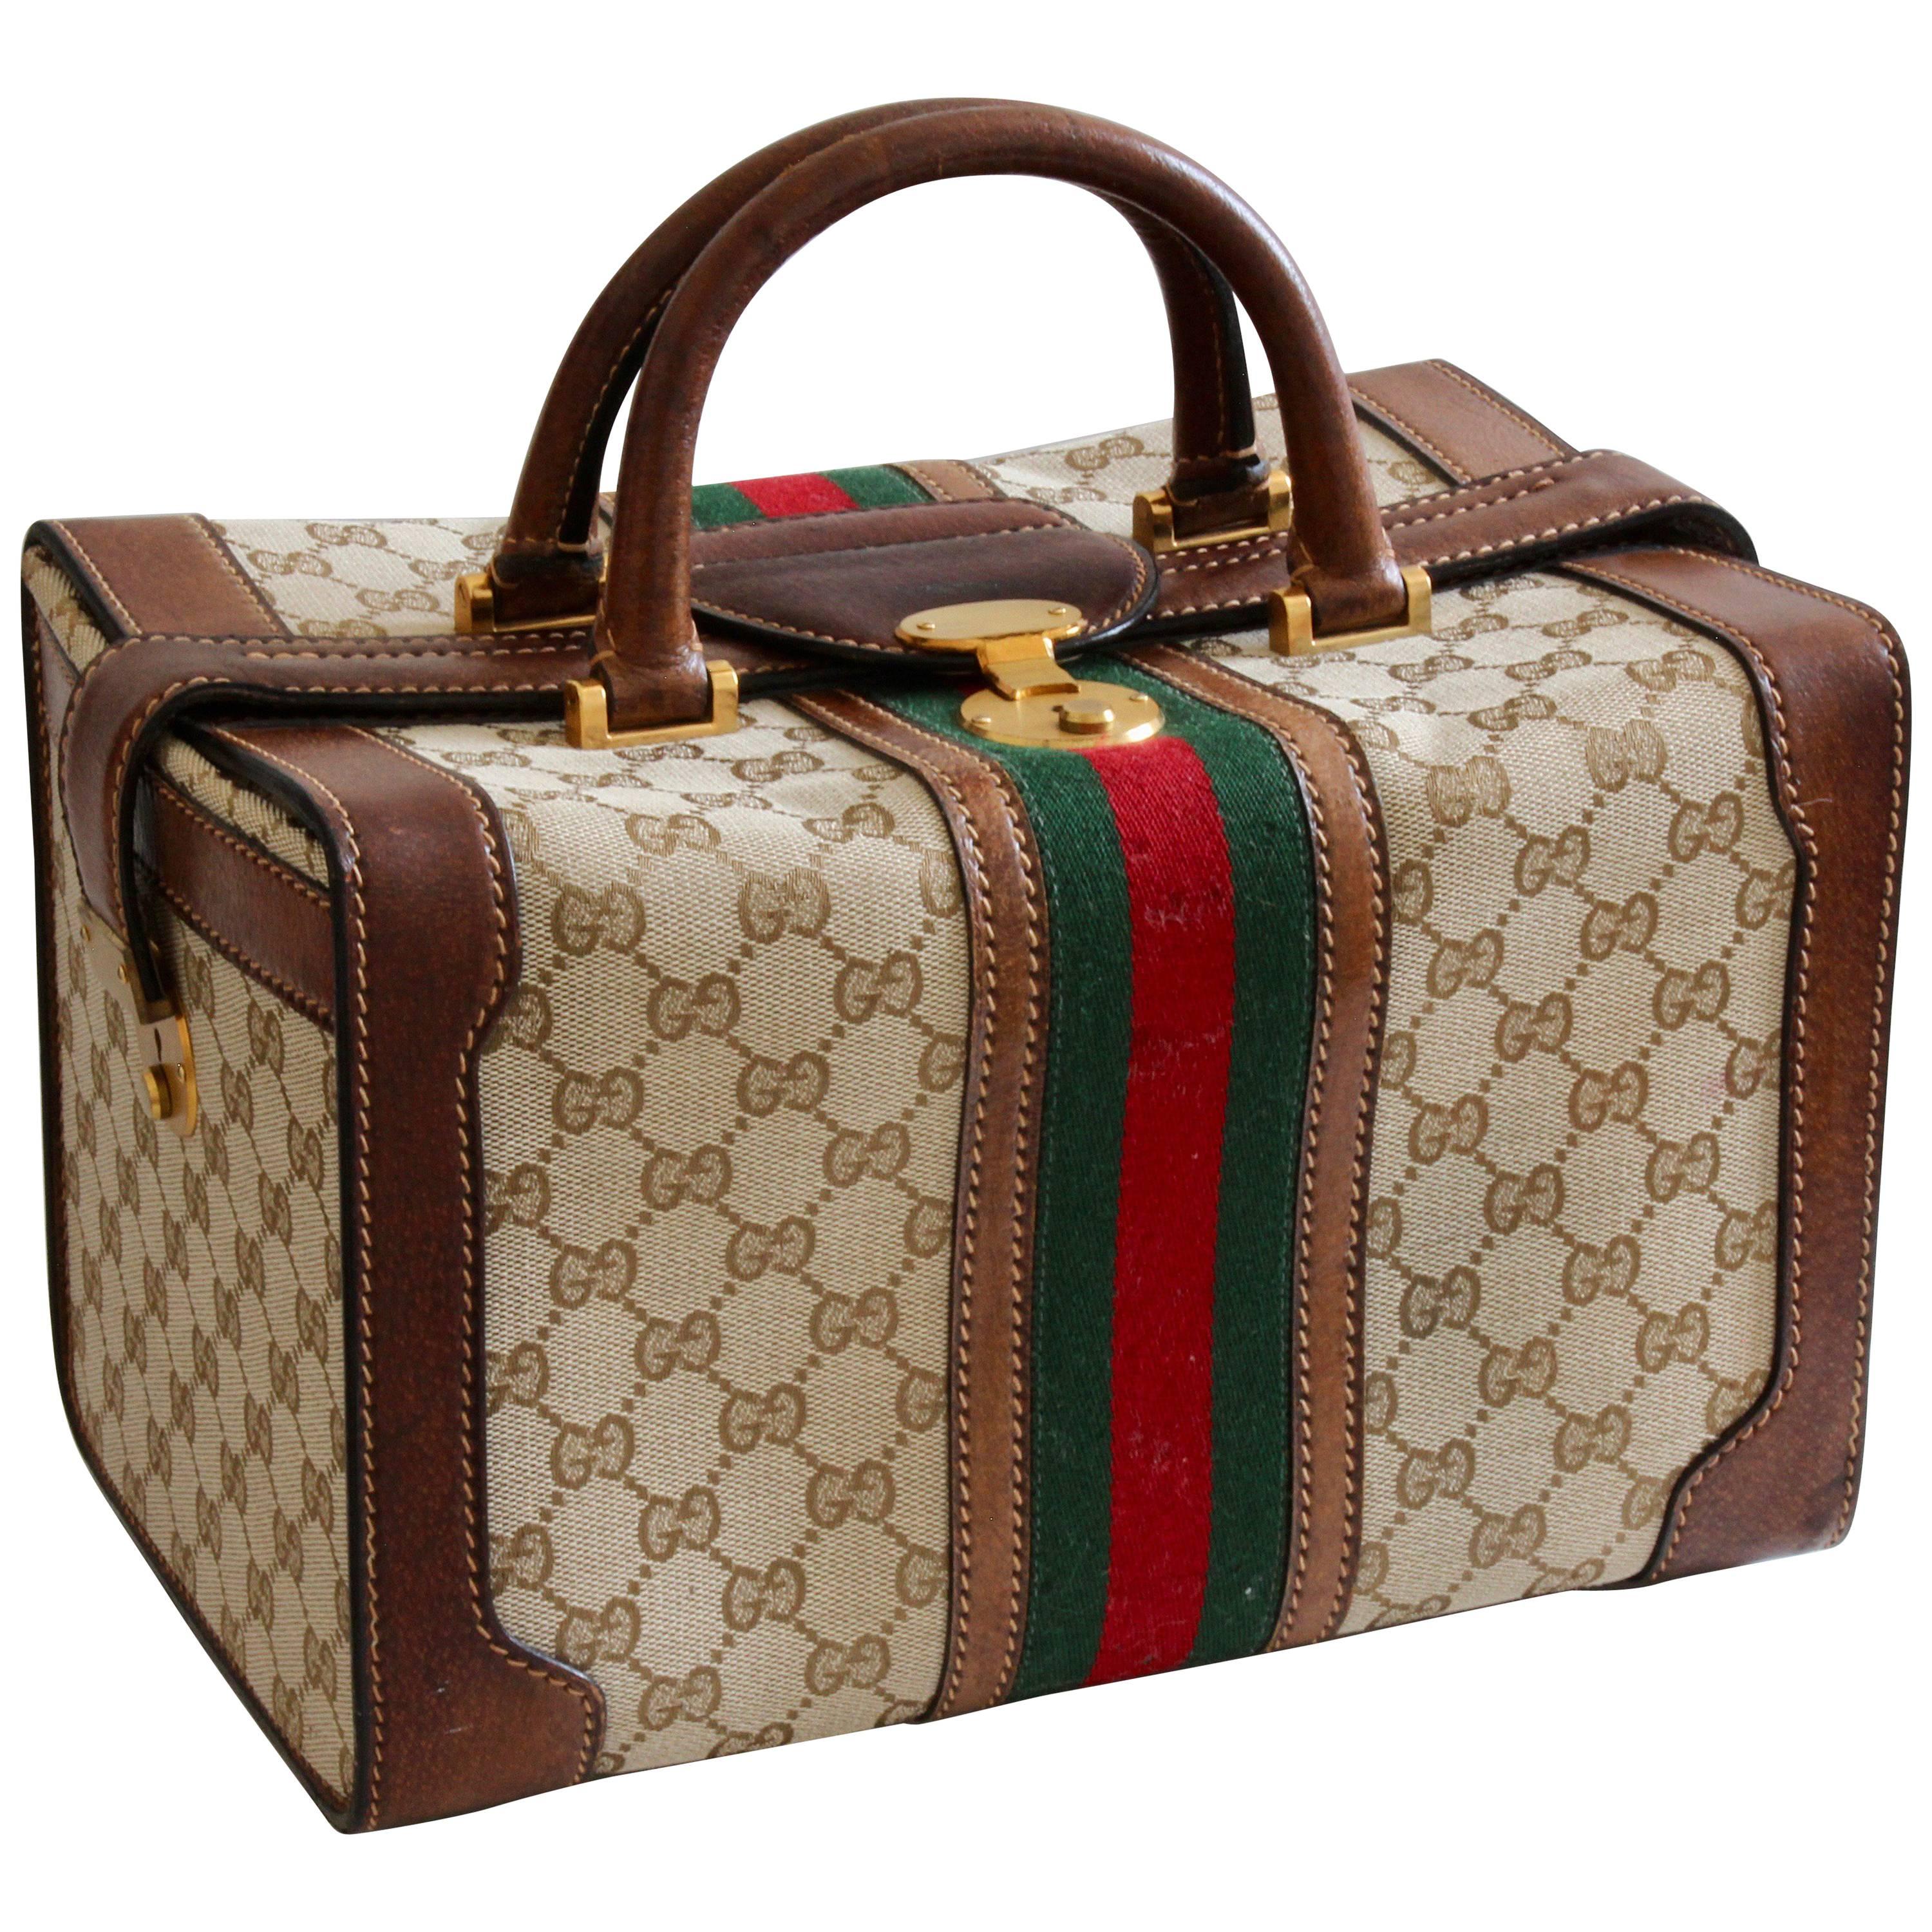 Gucci Logo Doctors Bag Train Case Vanity Webbing Travel Carry On Luggage, 1970s